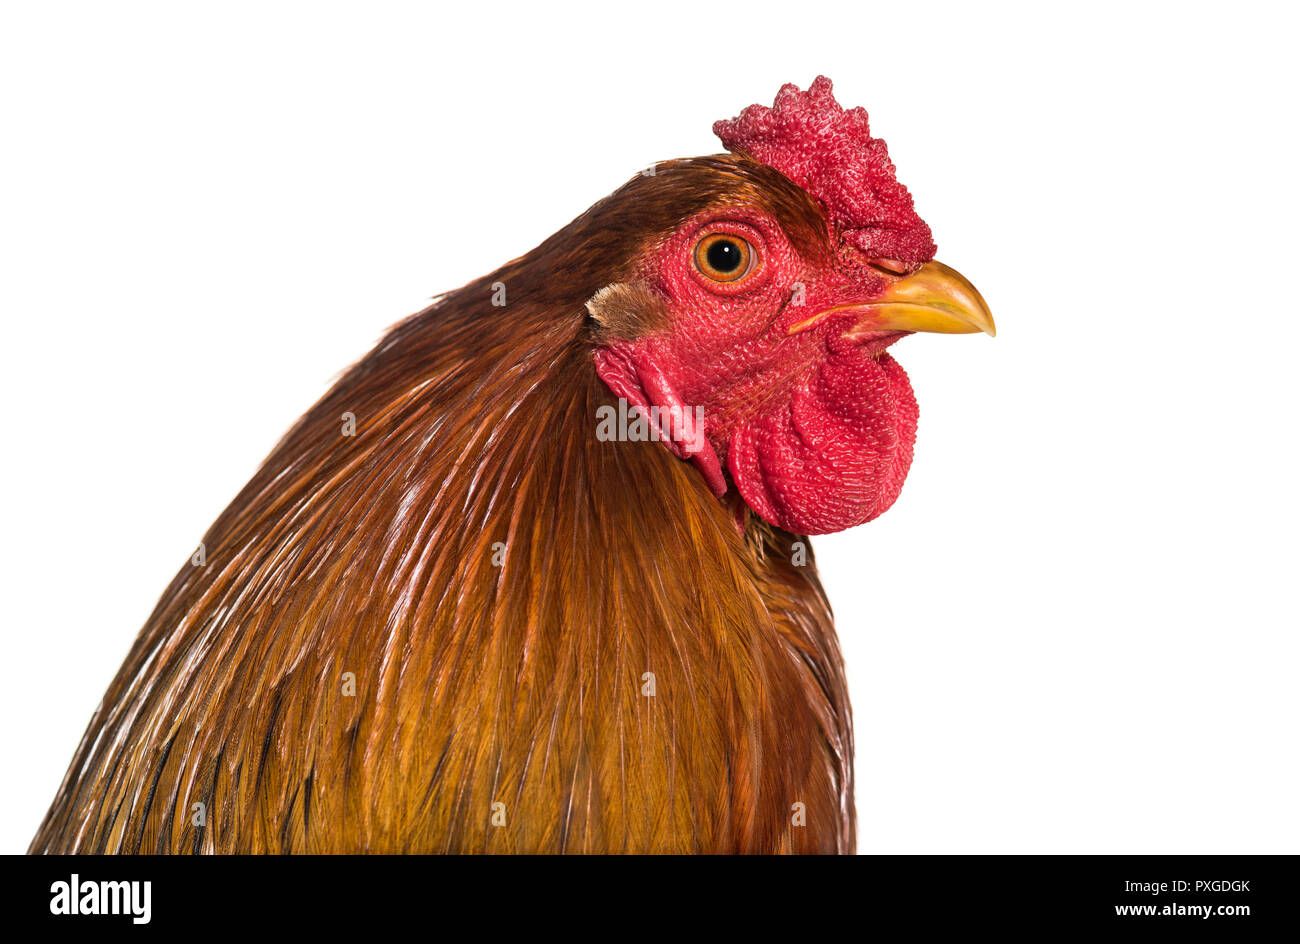 Brahma Rooster, close up against white background Stock Photo